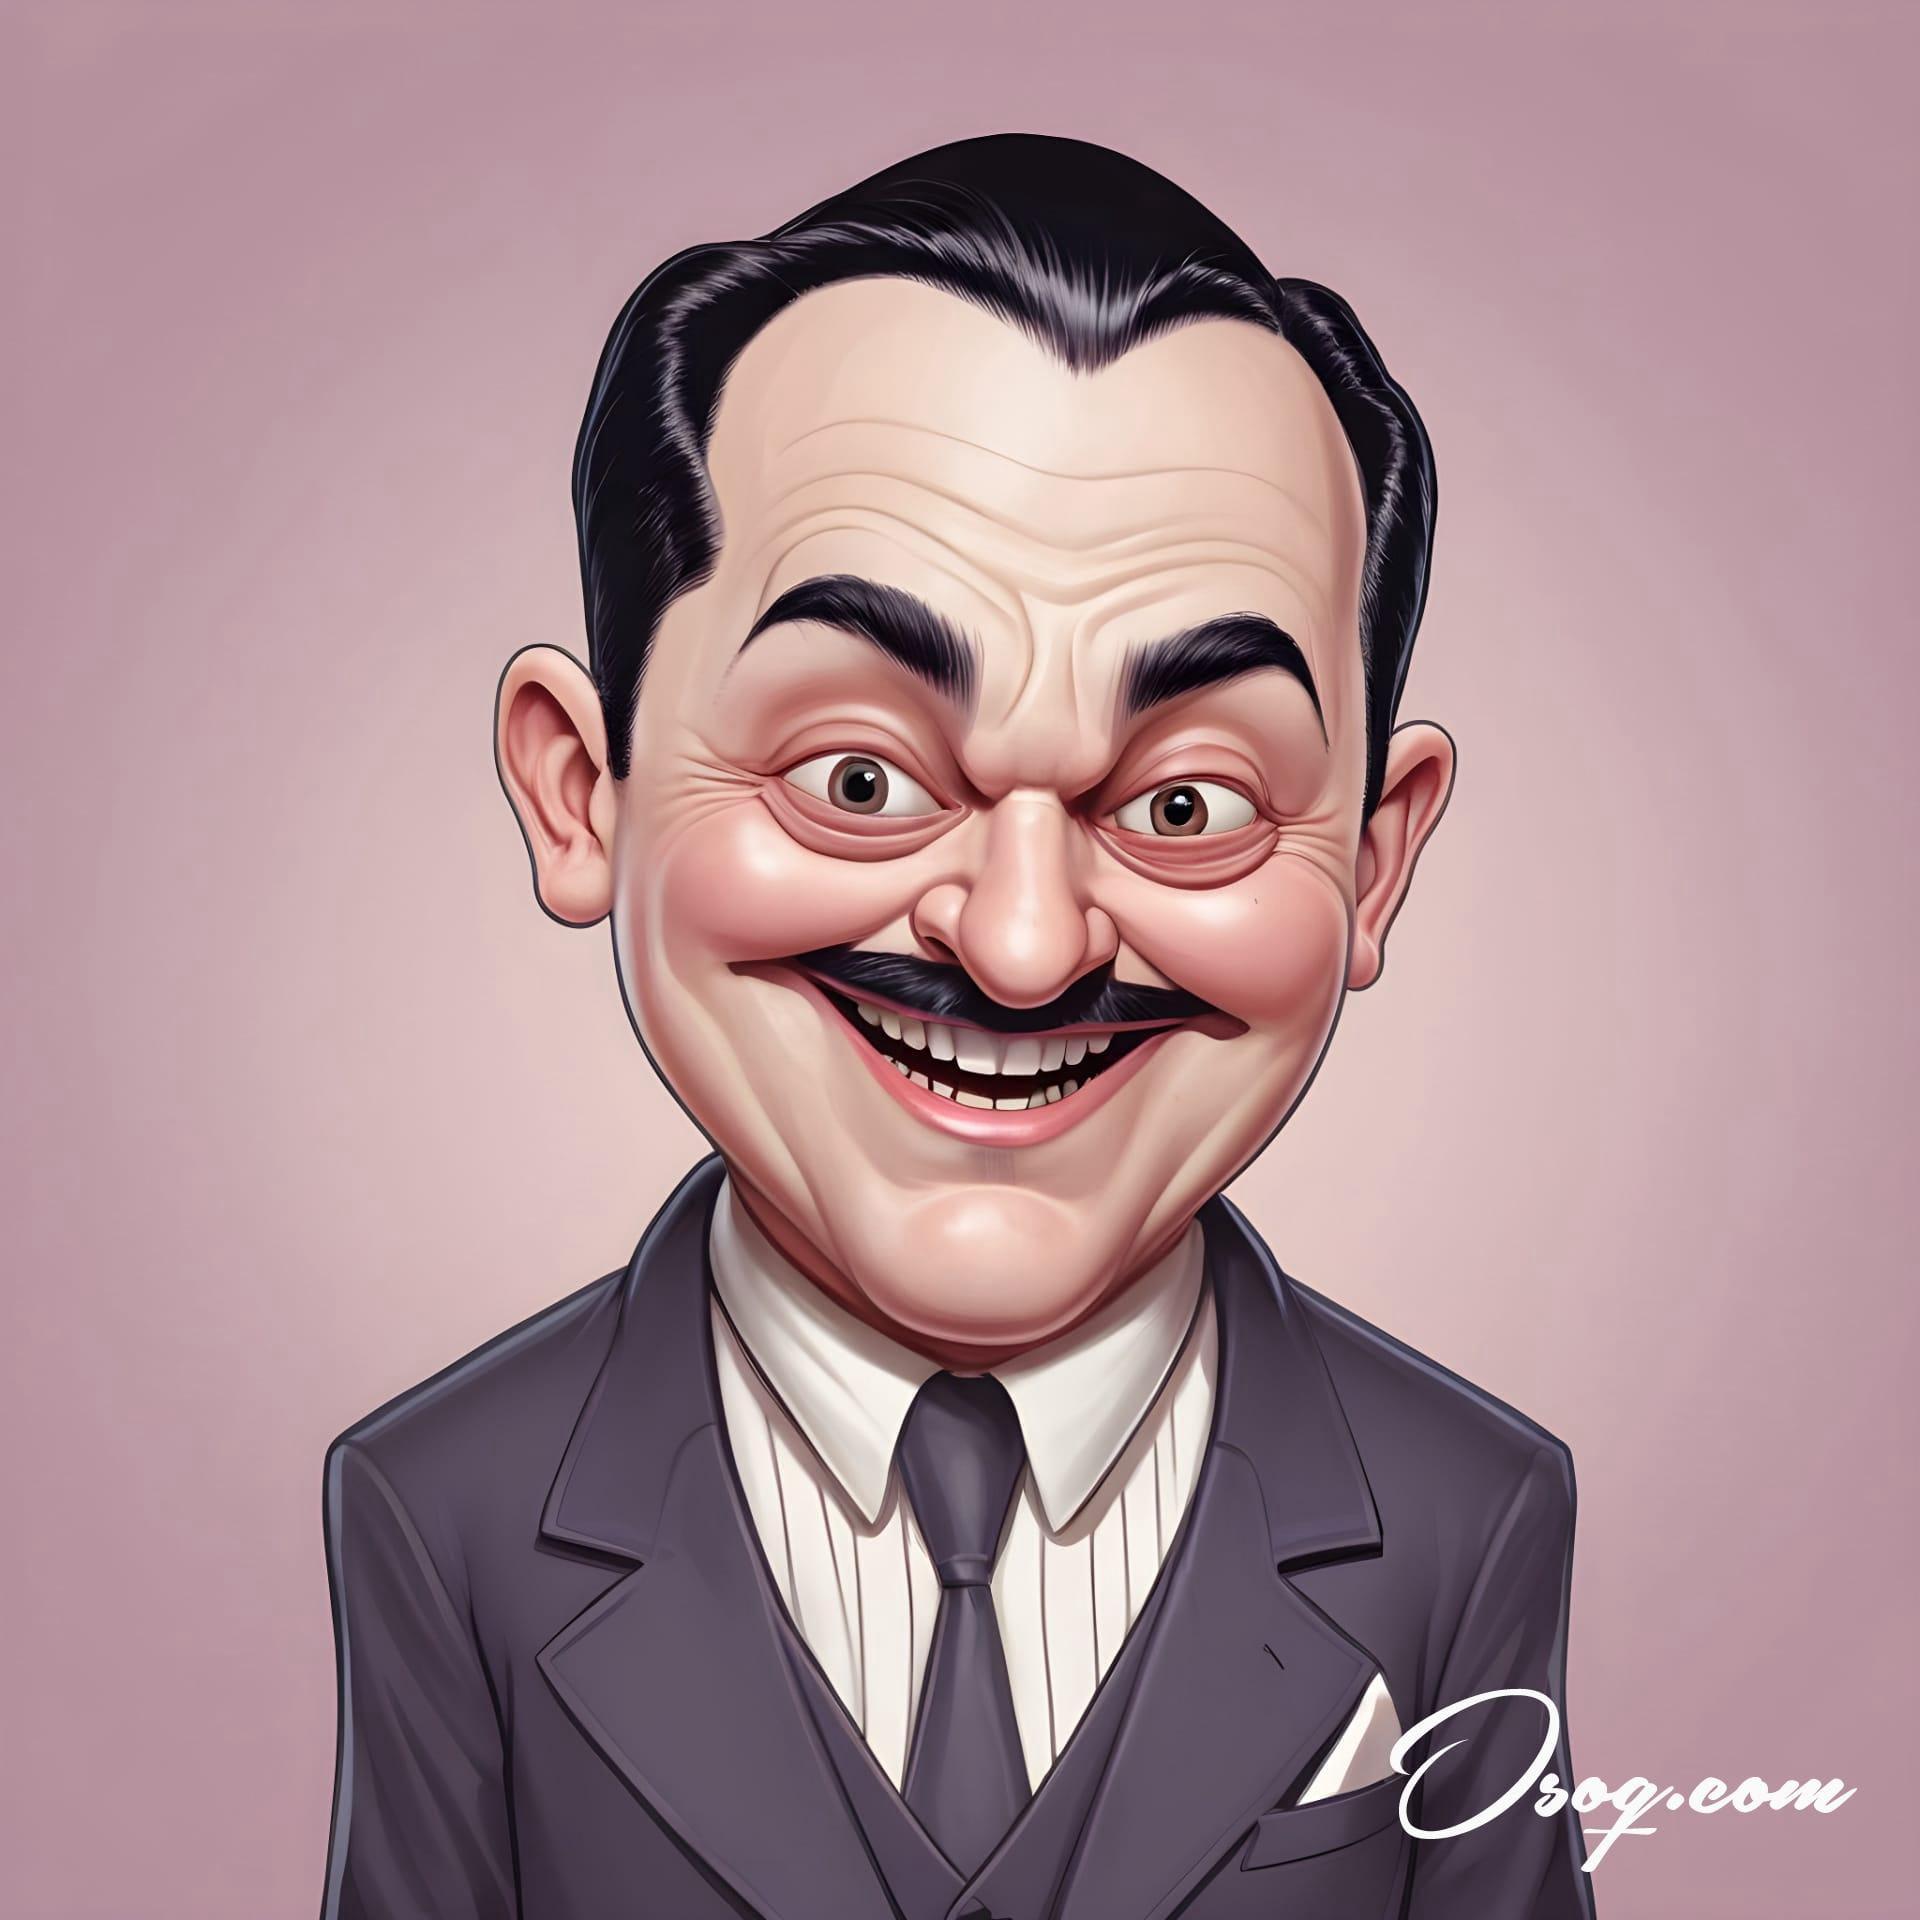 Addams family caricature 02